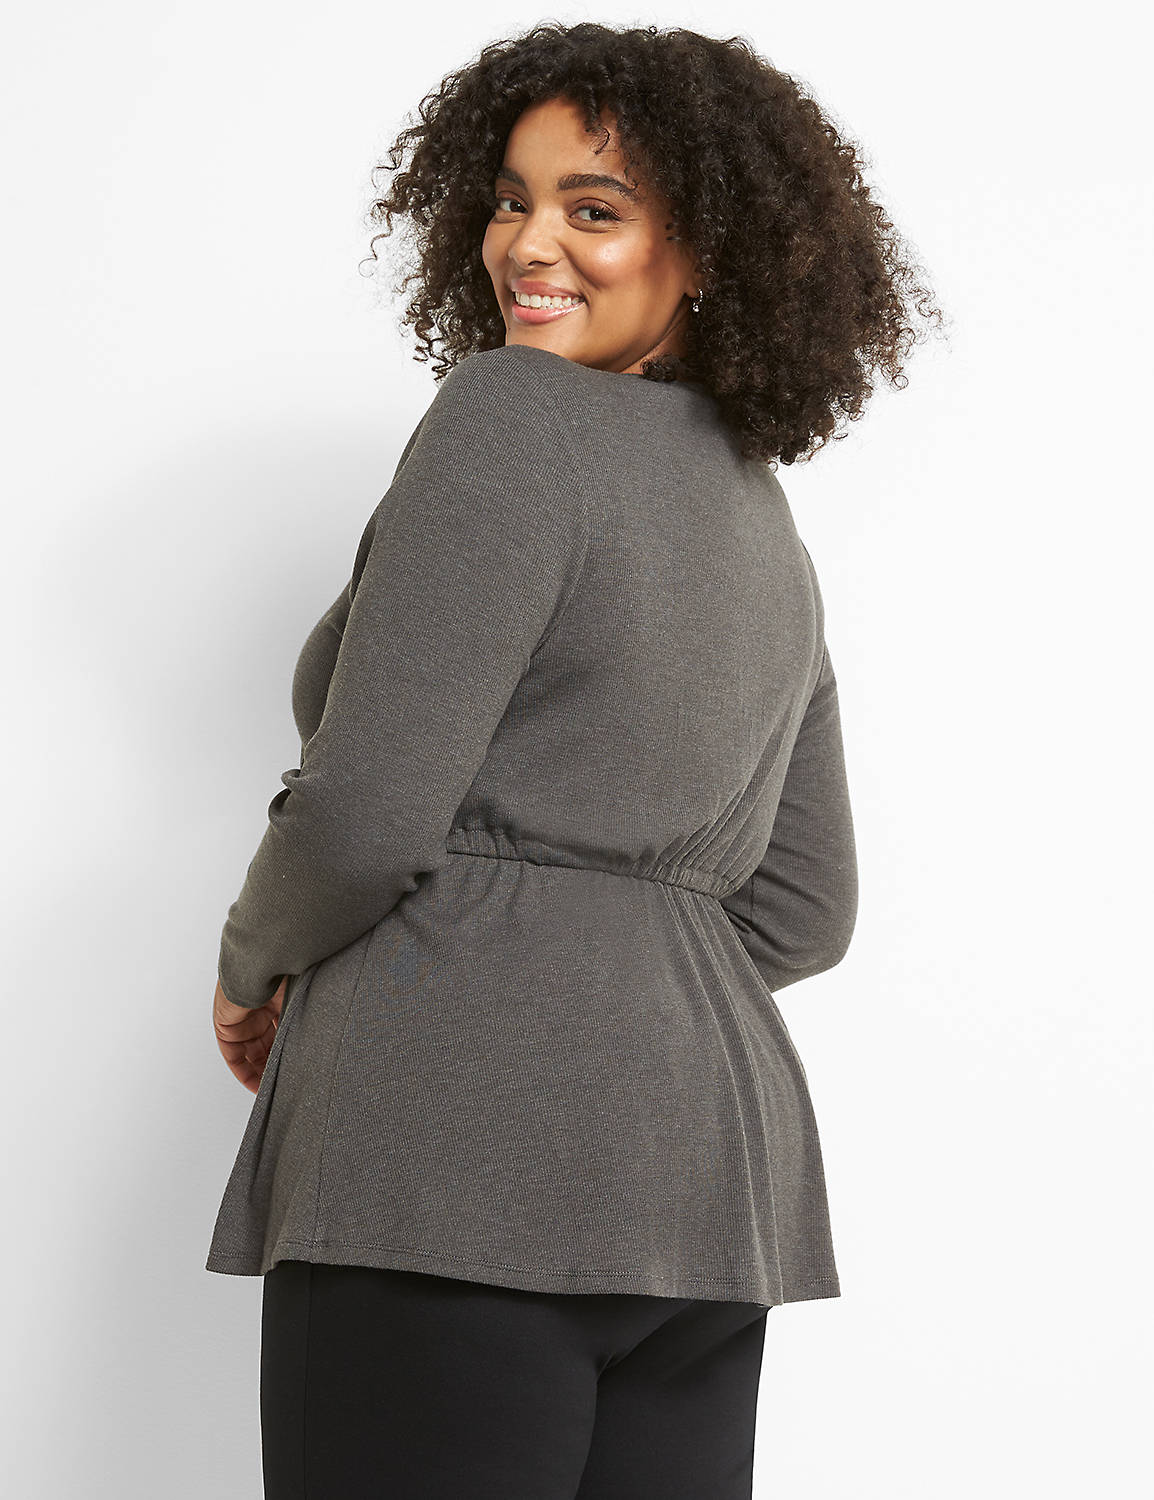 Long Sleeve Faux Wrap Knit Top With Buttons In Rib 1122633:B65 Dark Heather Grey:10/12 Product Image 2